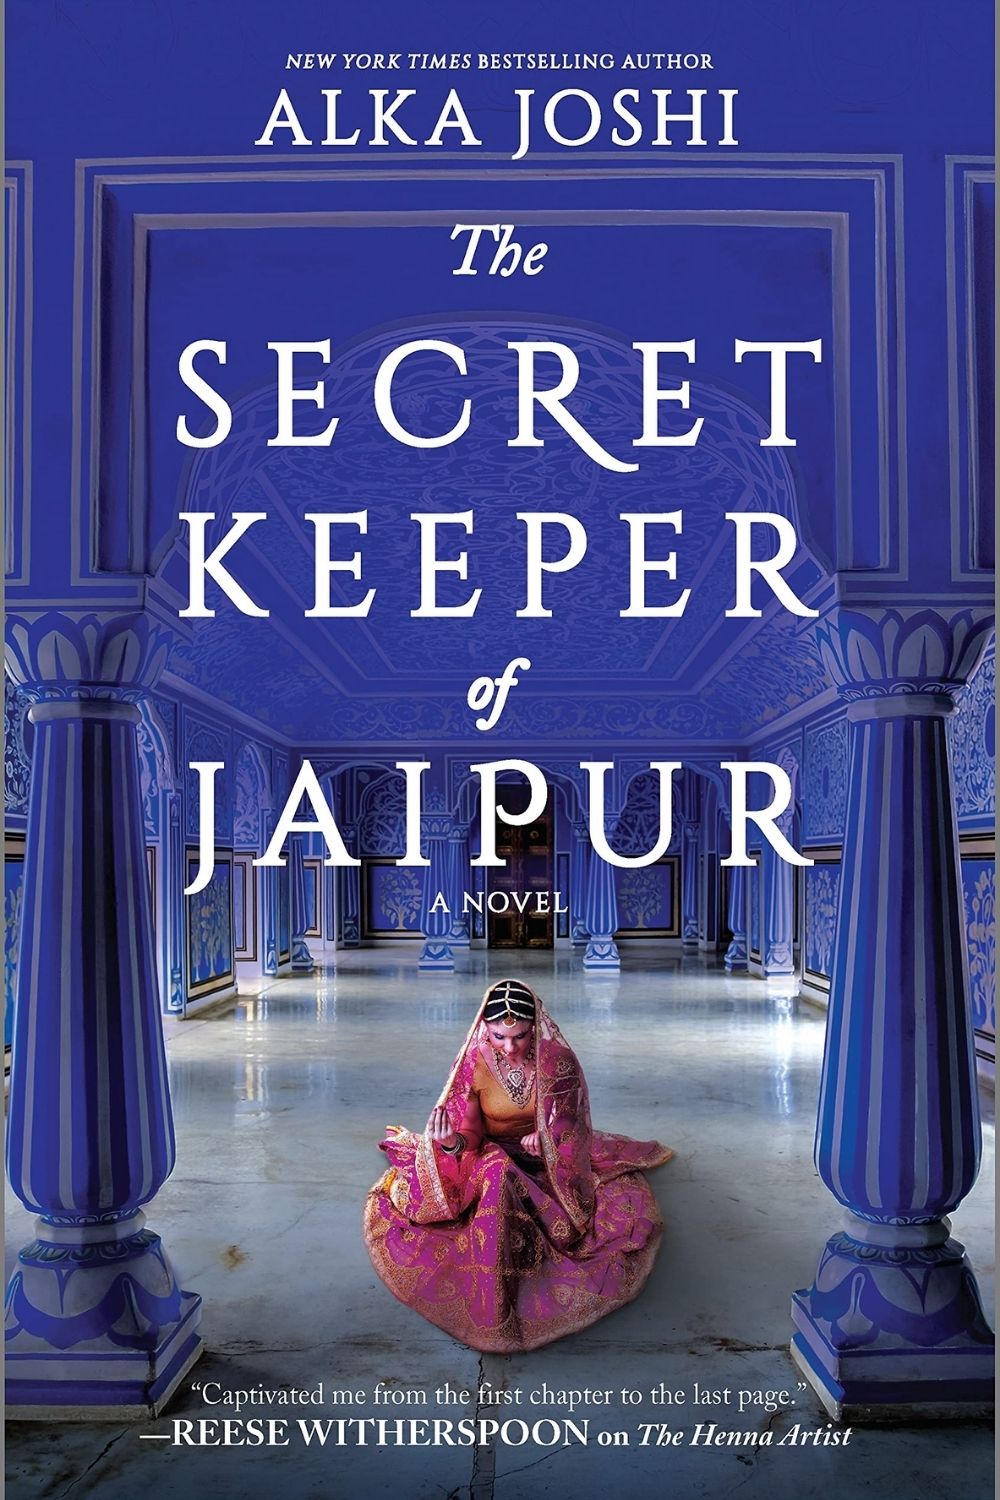 Top 10 Books By Indian Authors In June 2021 (The Secret Keeper of Jaipur by Alka Joshi)